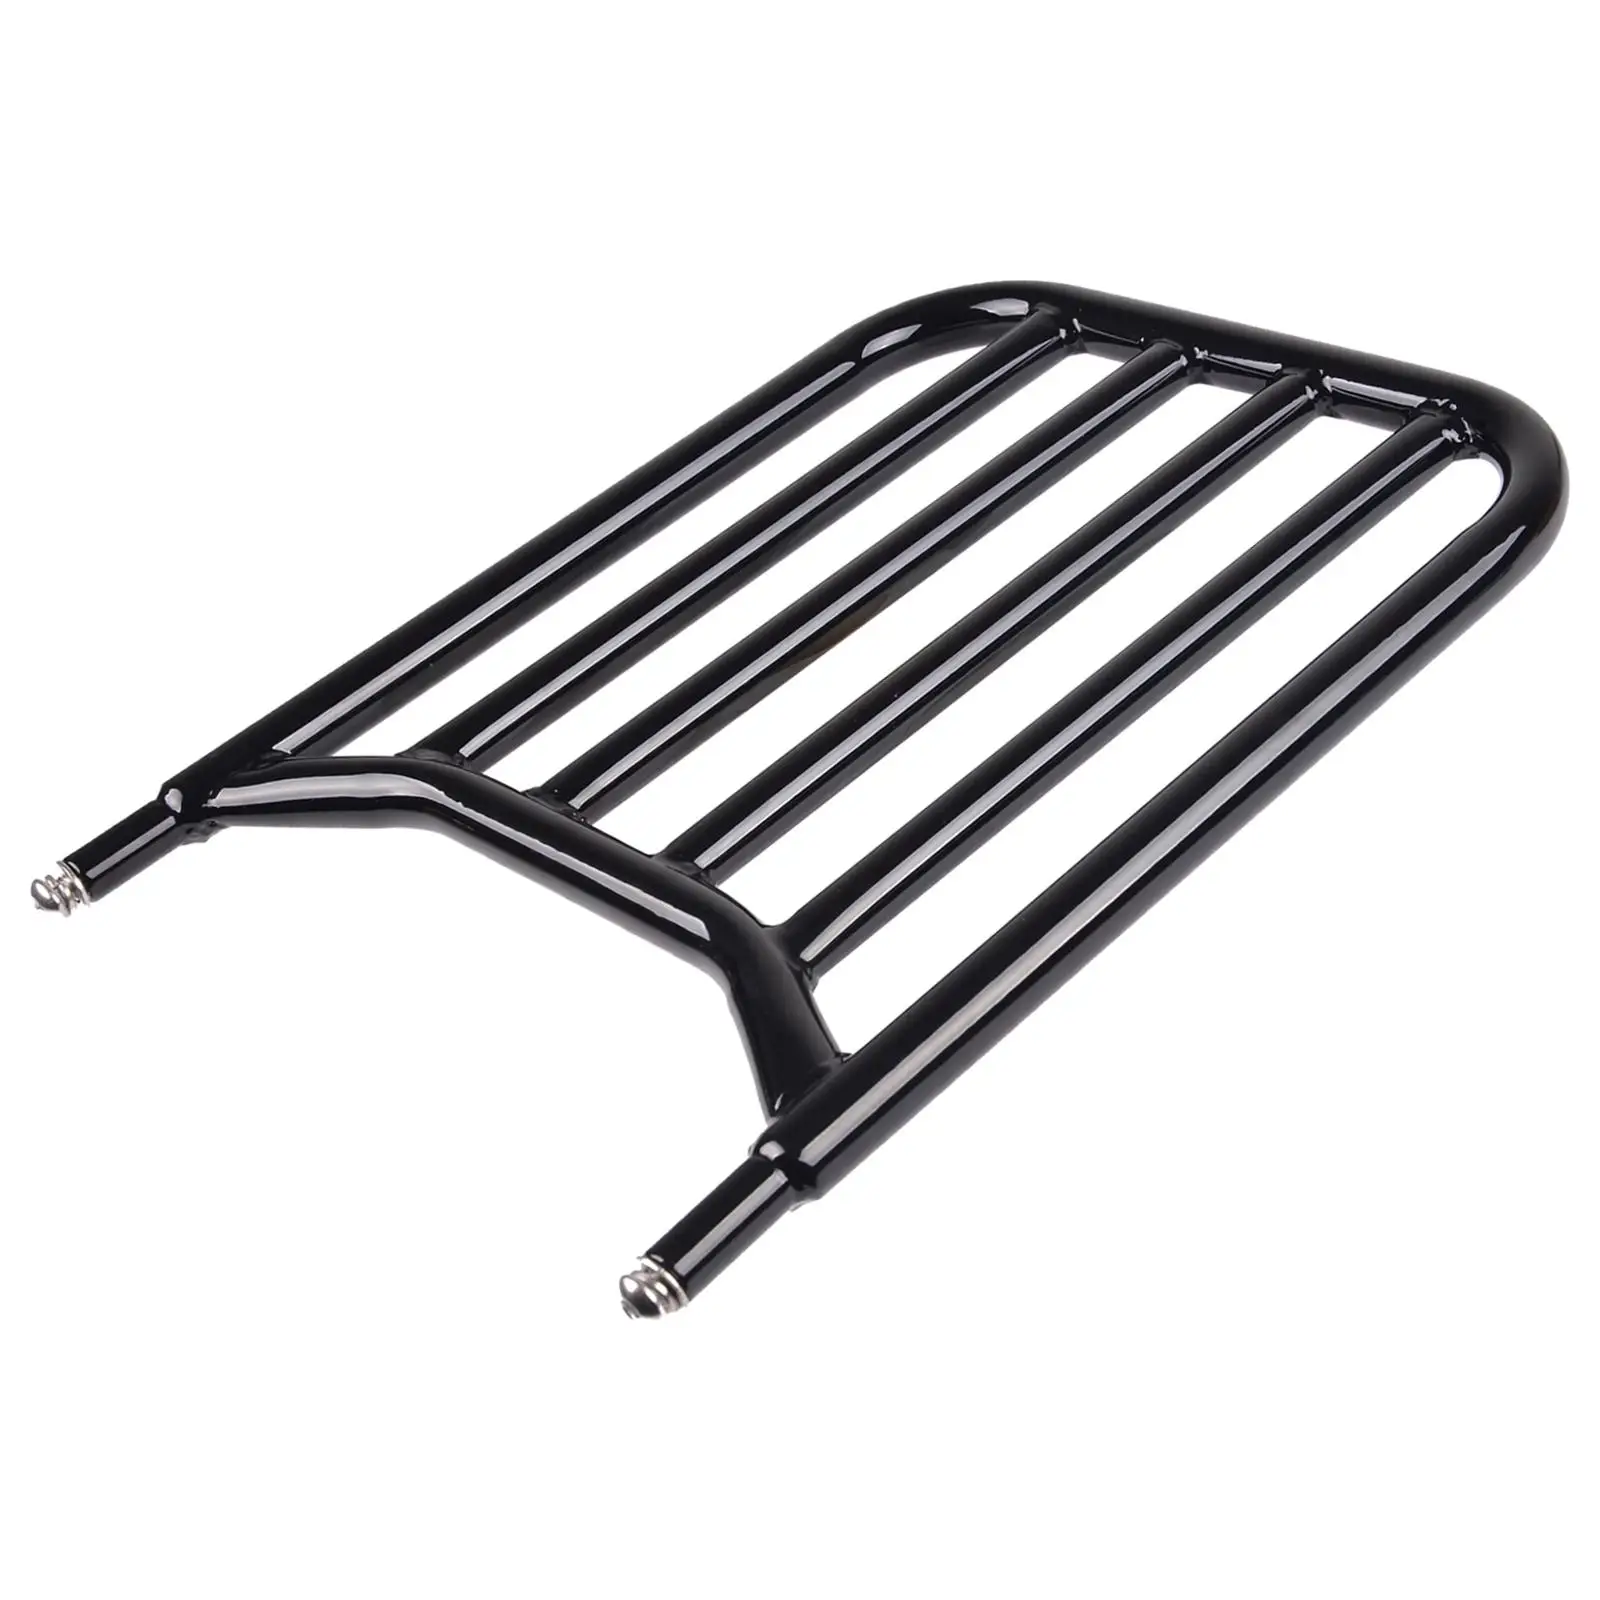 Backrest Sissy Bar Cargo Carrier Replacement Luggage Rack for Indian Chieftain